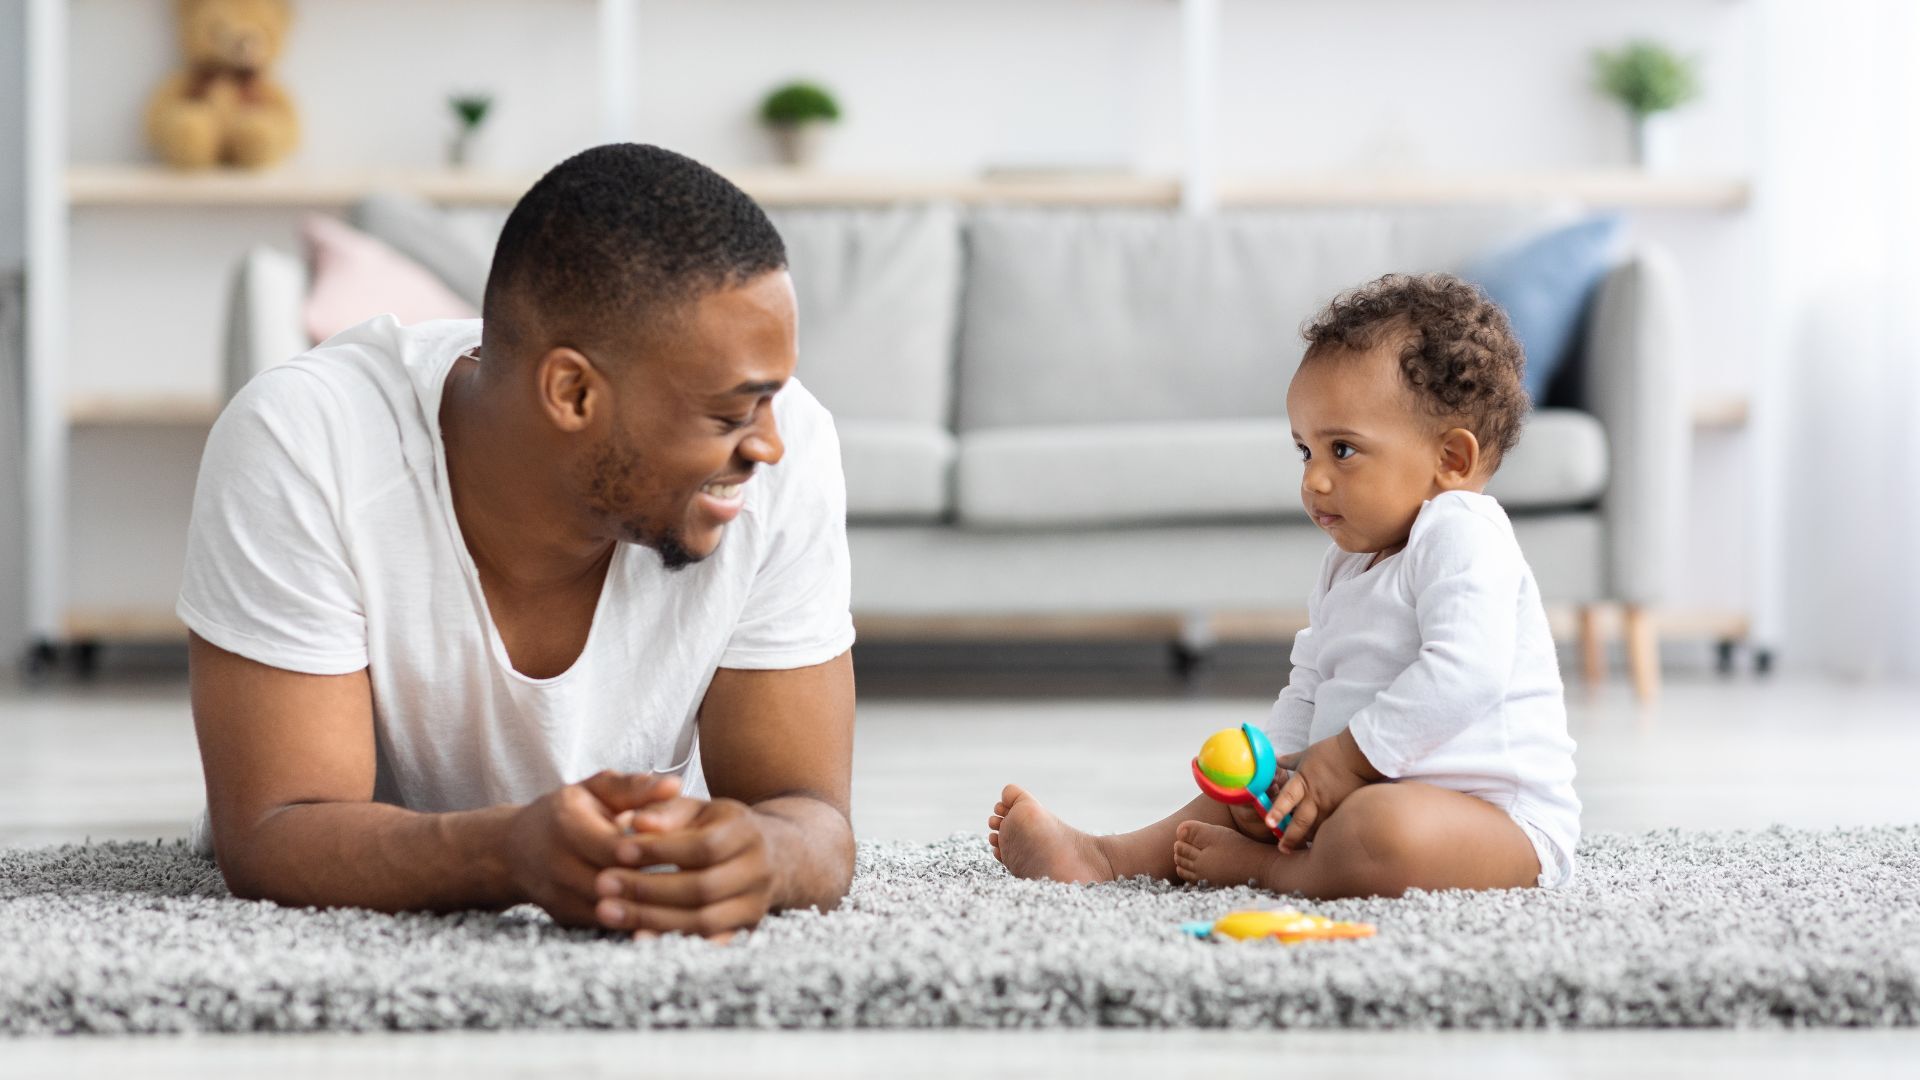 Paternity leave benefits new fathers